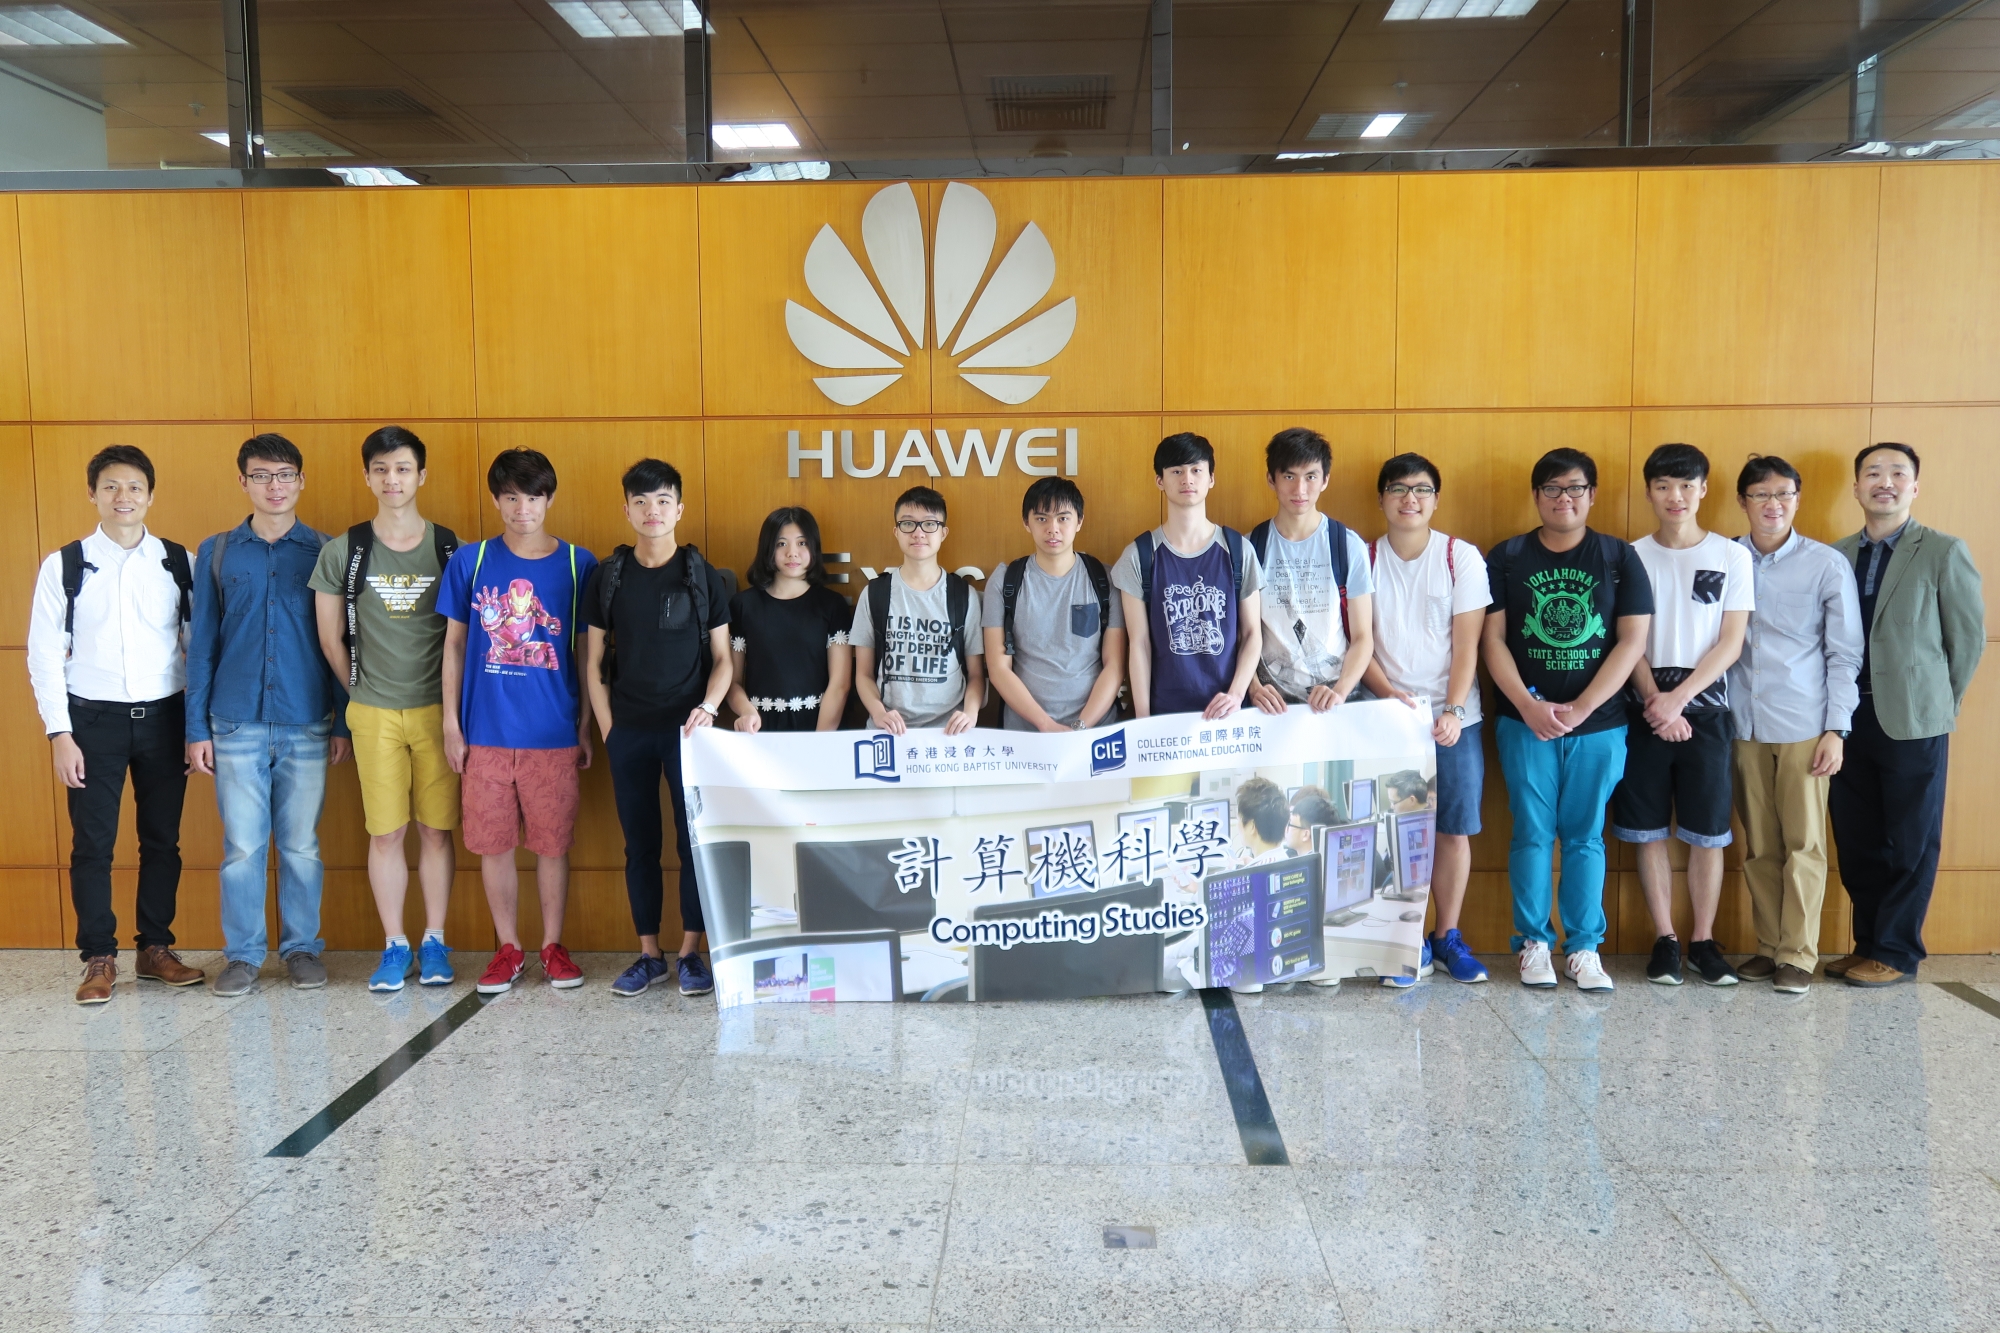 CIE students had a fruitful learning experience during the visit to Huawei. 